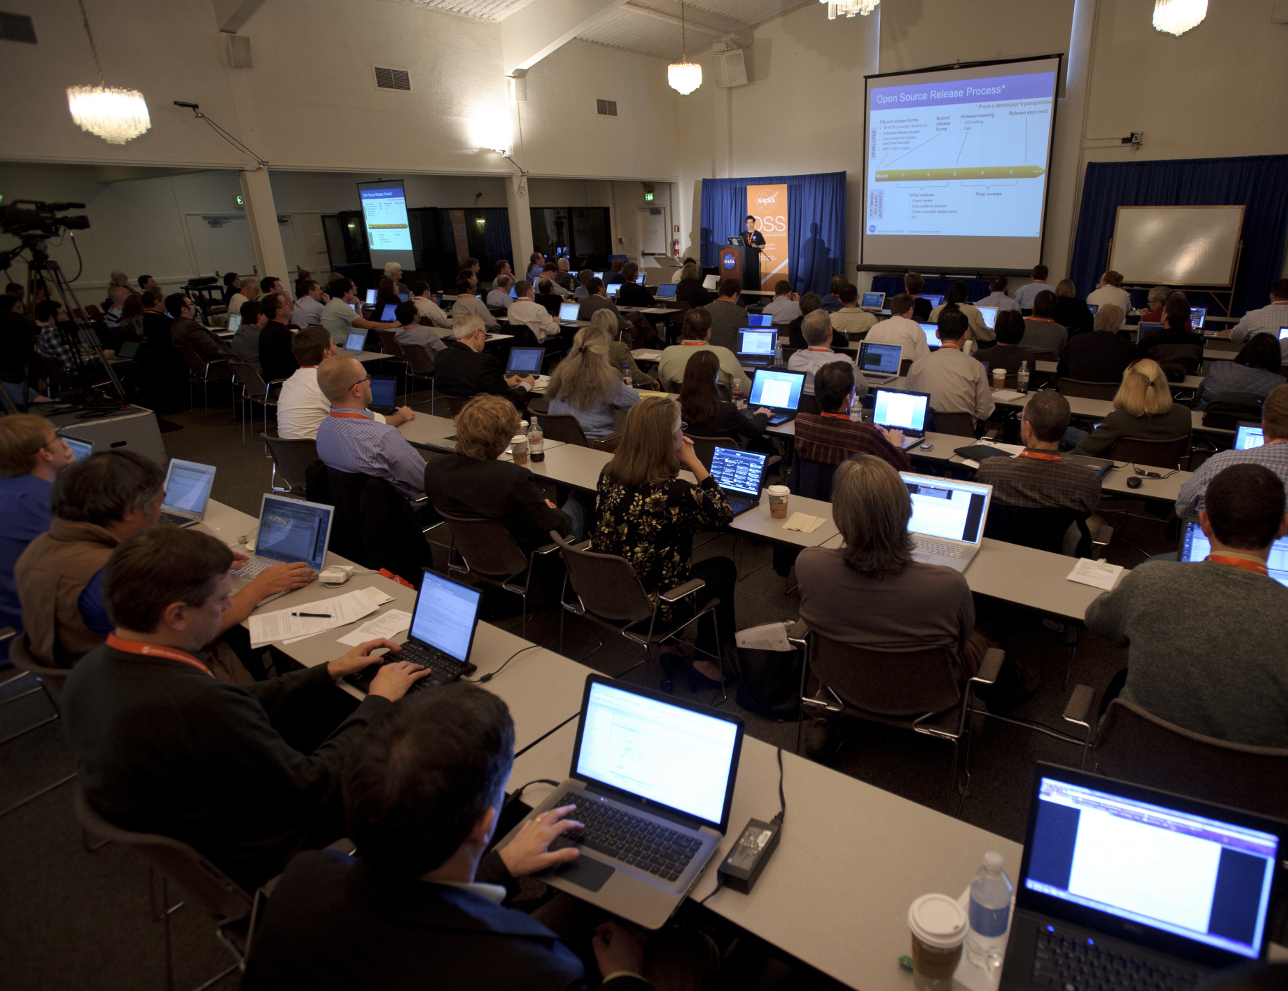 Image of the audience at the NASA Open Source Summit 2011.